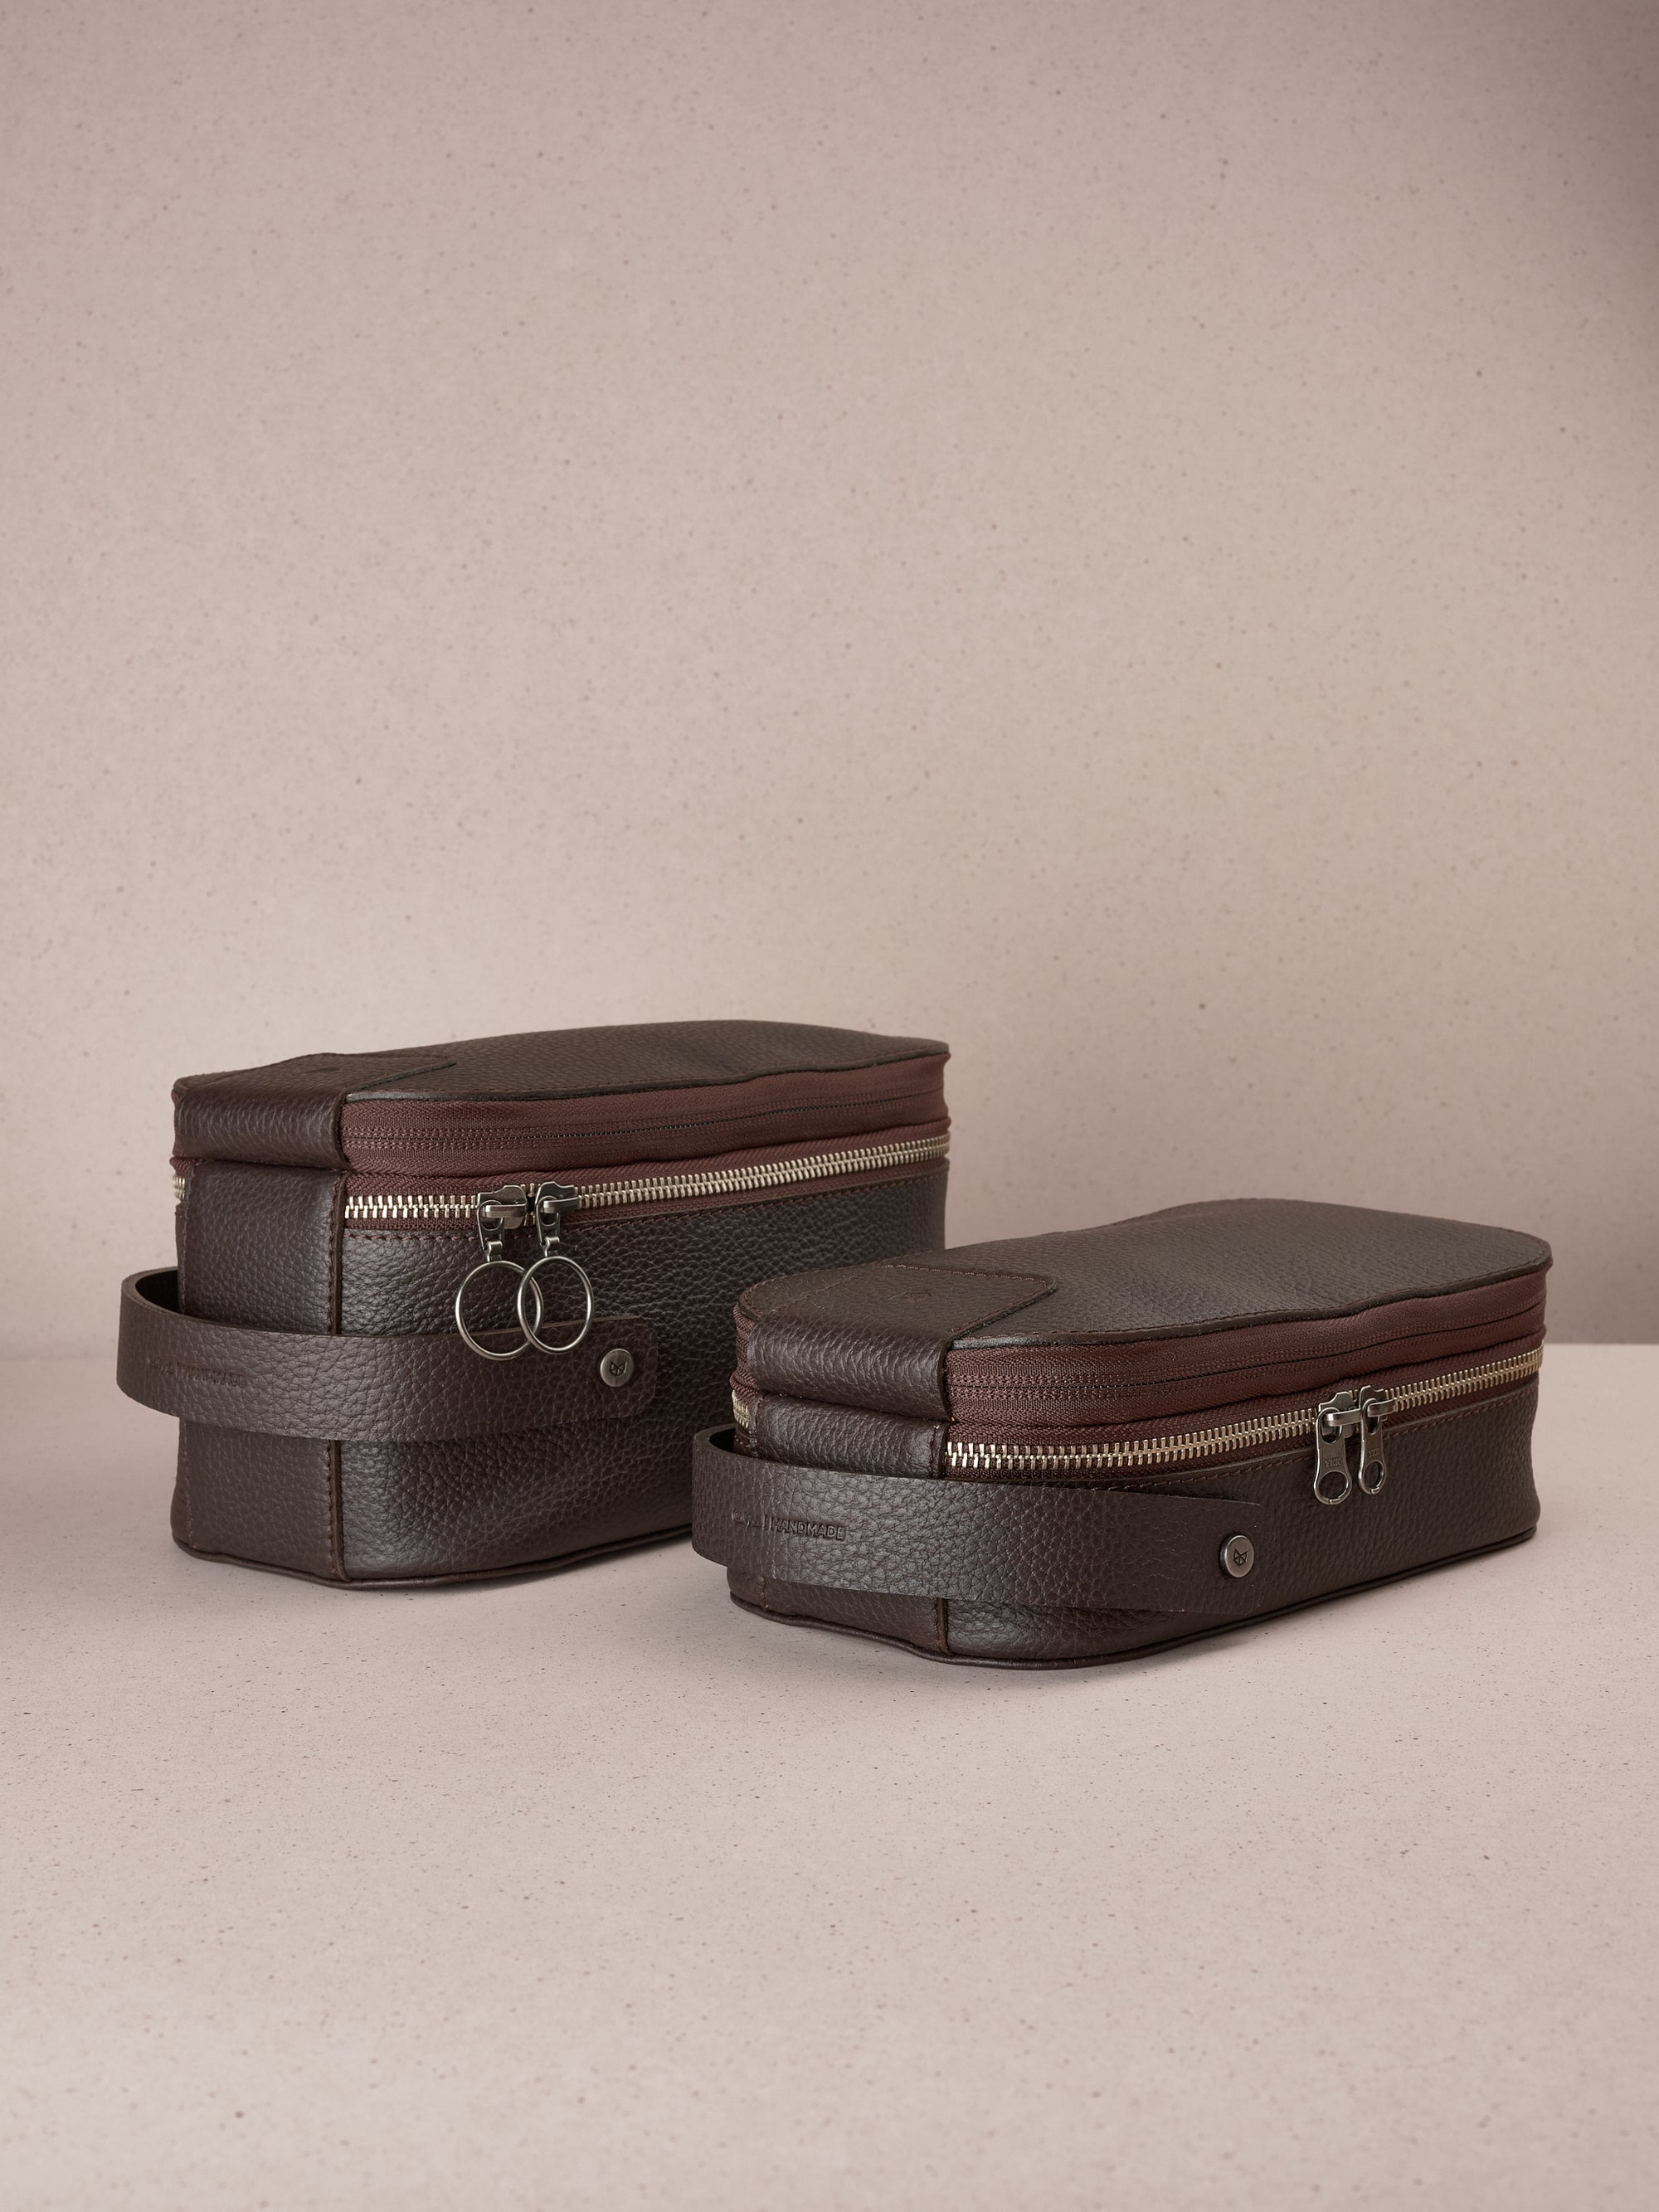 Customized toiletry bag dark brown by Capra Leather